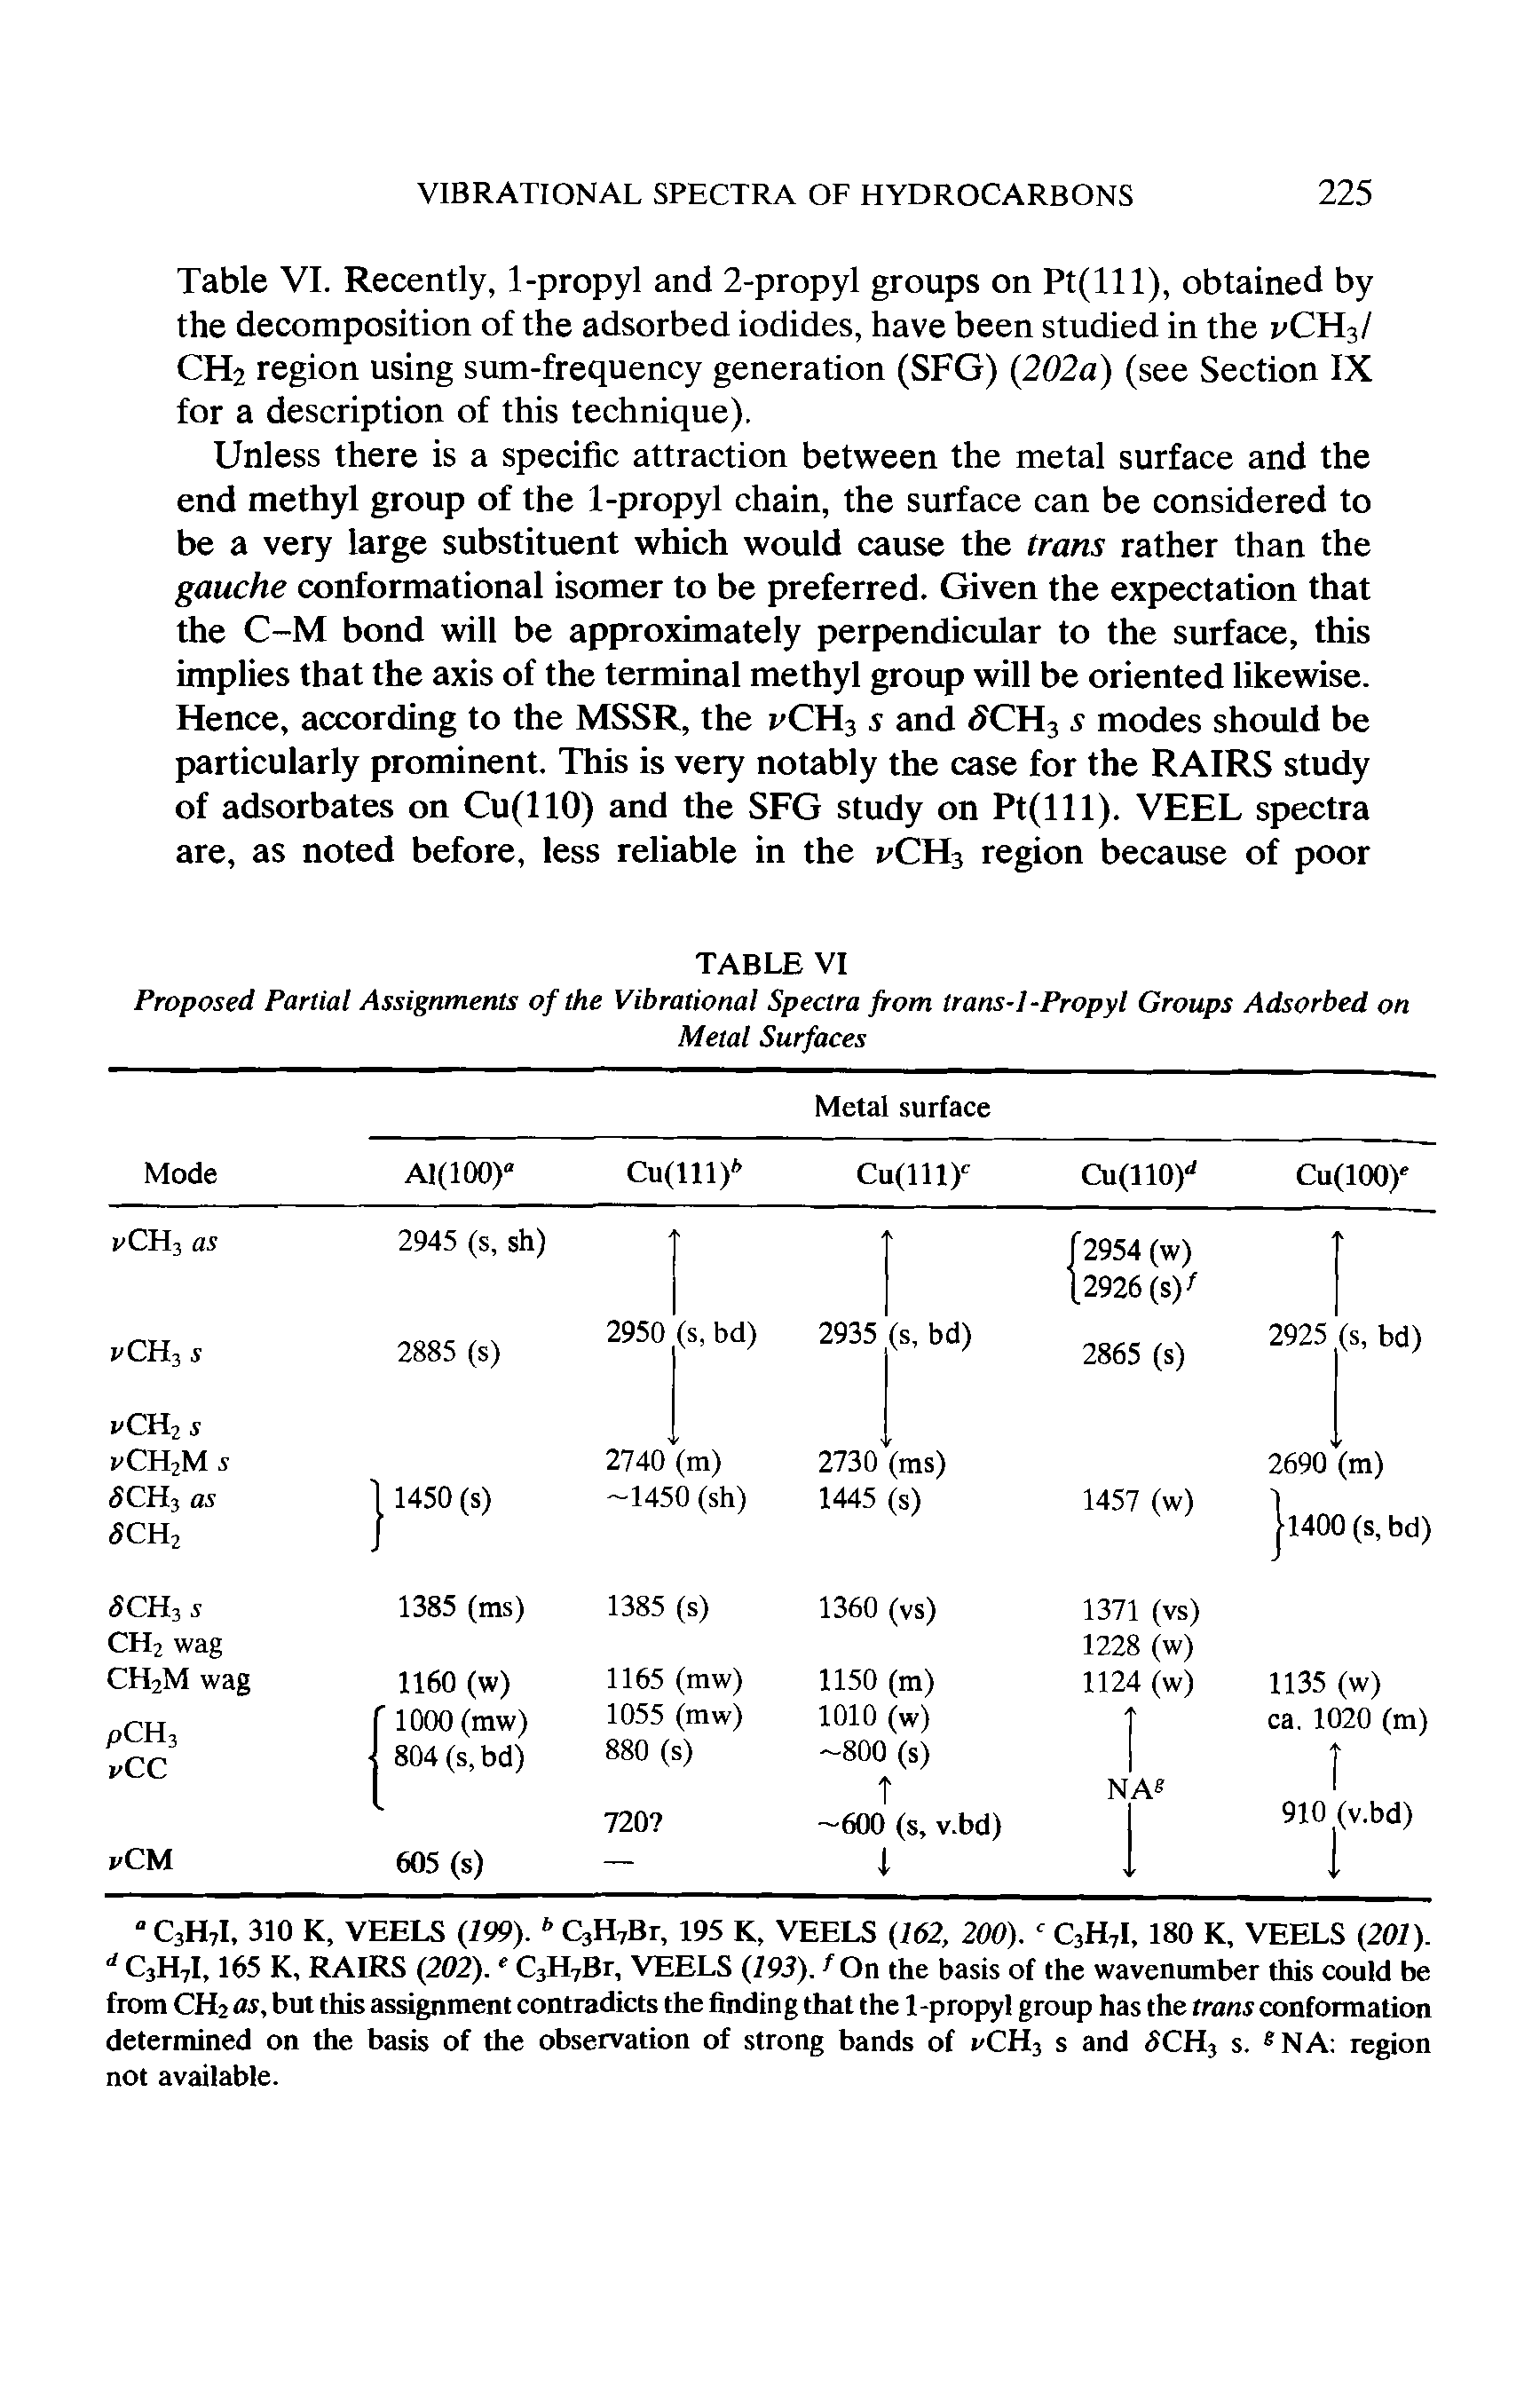 Table VI. Recently, 1-propyl and 2-propyl groups on Pt(lll), obtained by the decomposition of the adsorbed iodides, have been studied in the vCH3/ CH2 region using sum-frequency generation (SFG) (202a) (see Section IX for a description of this technique).